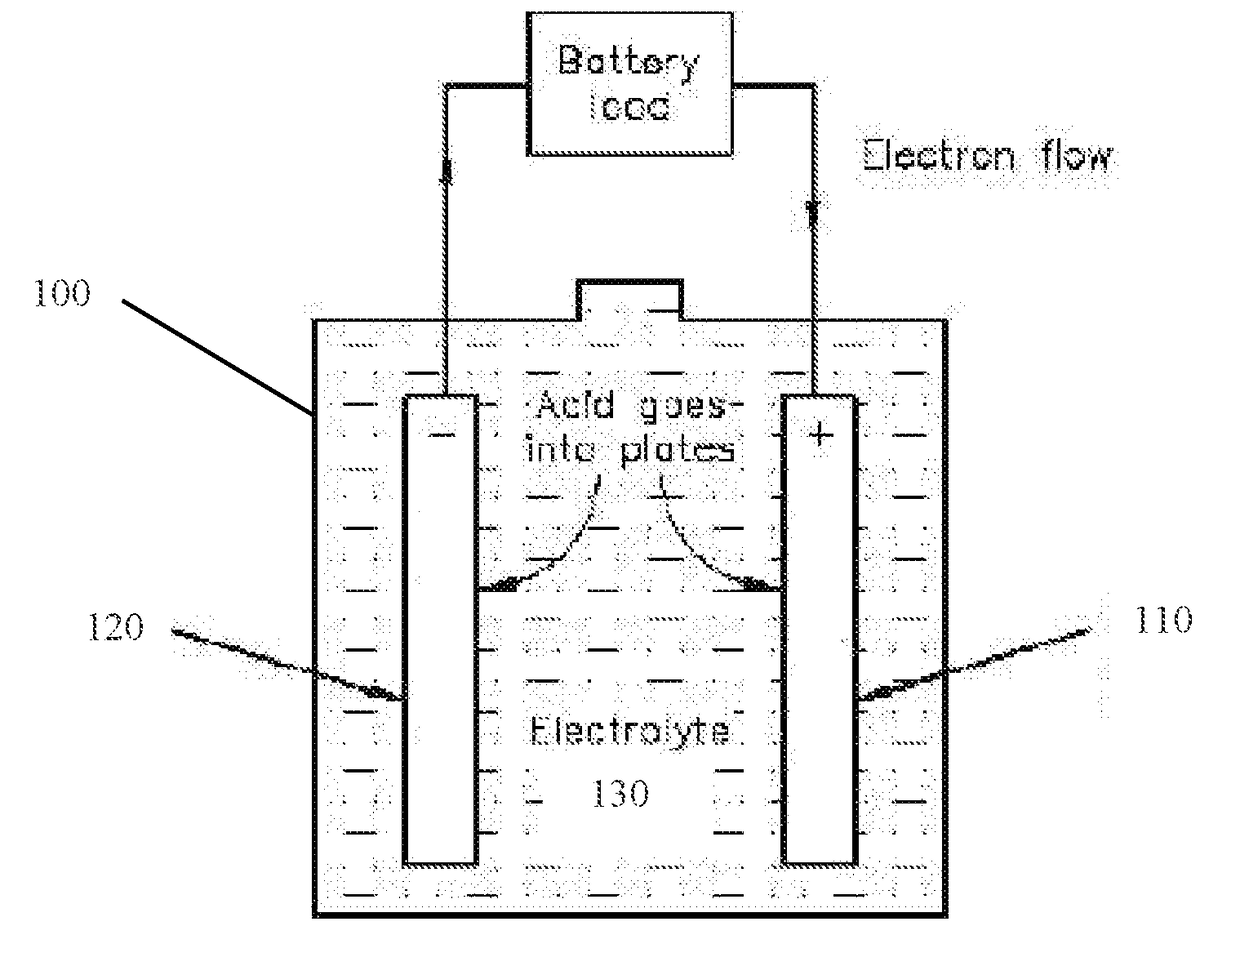 Lead-acid batteries with fast charge acceptance